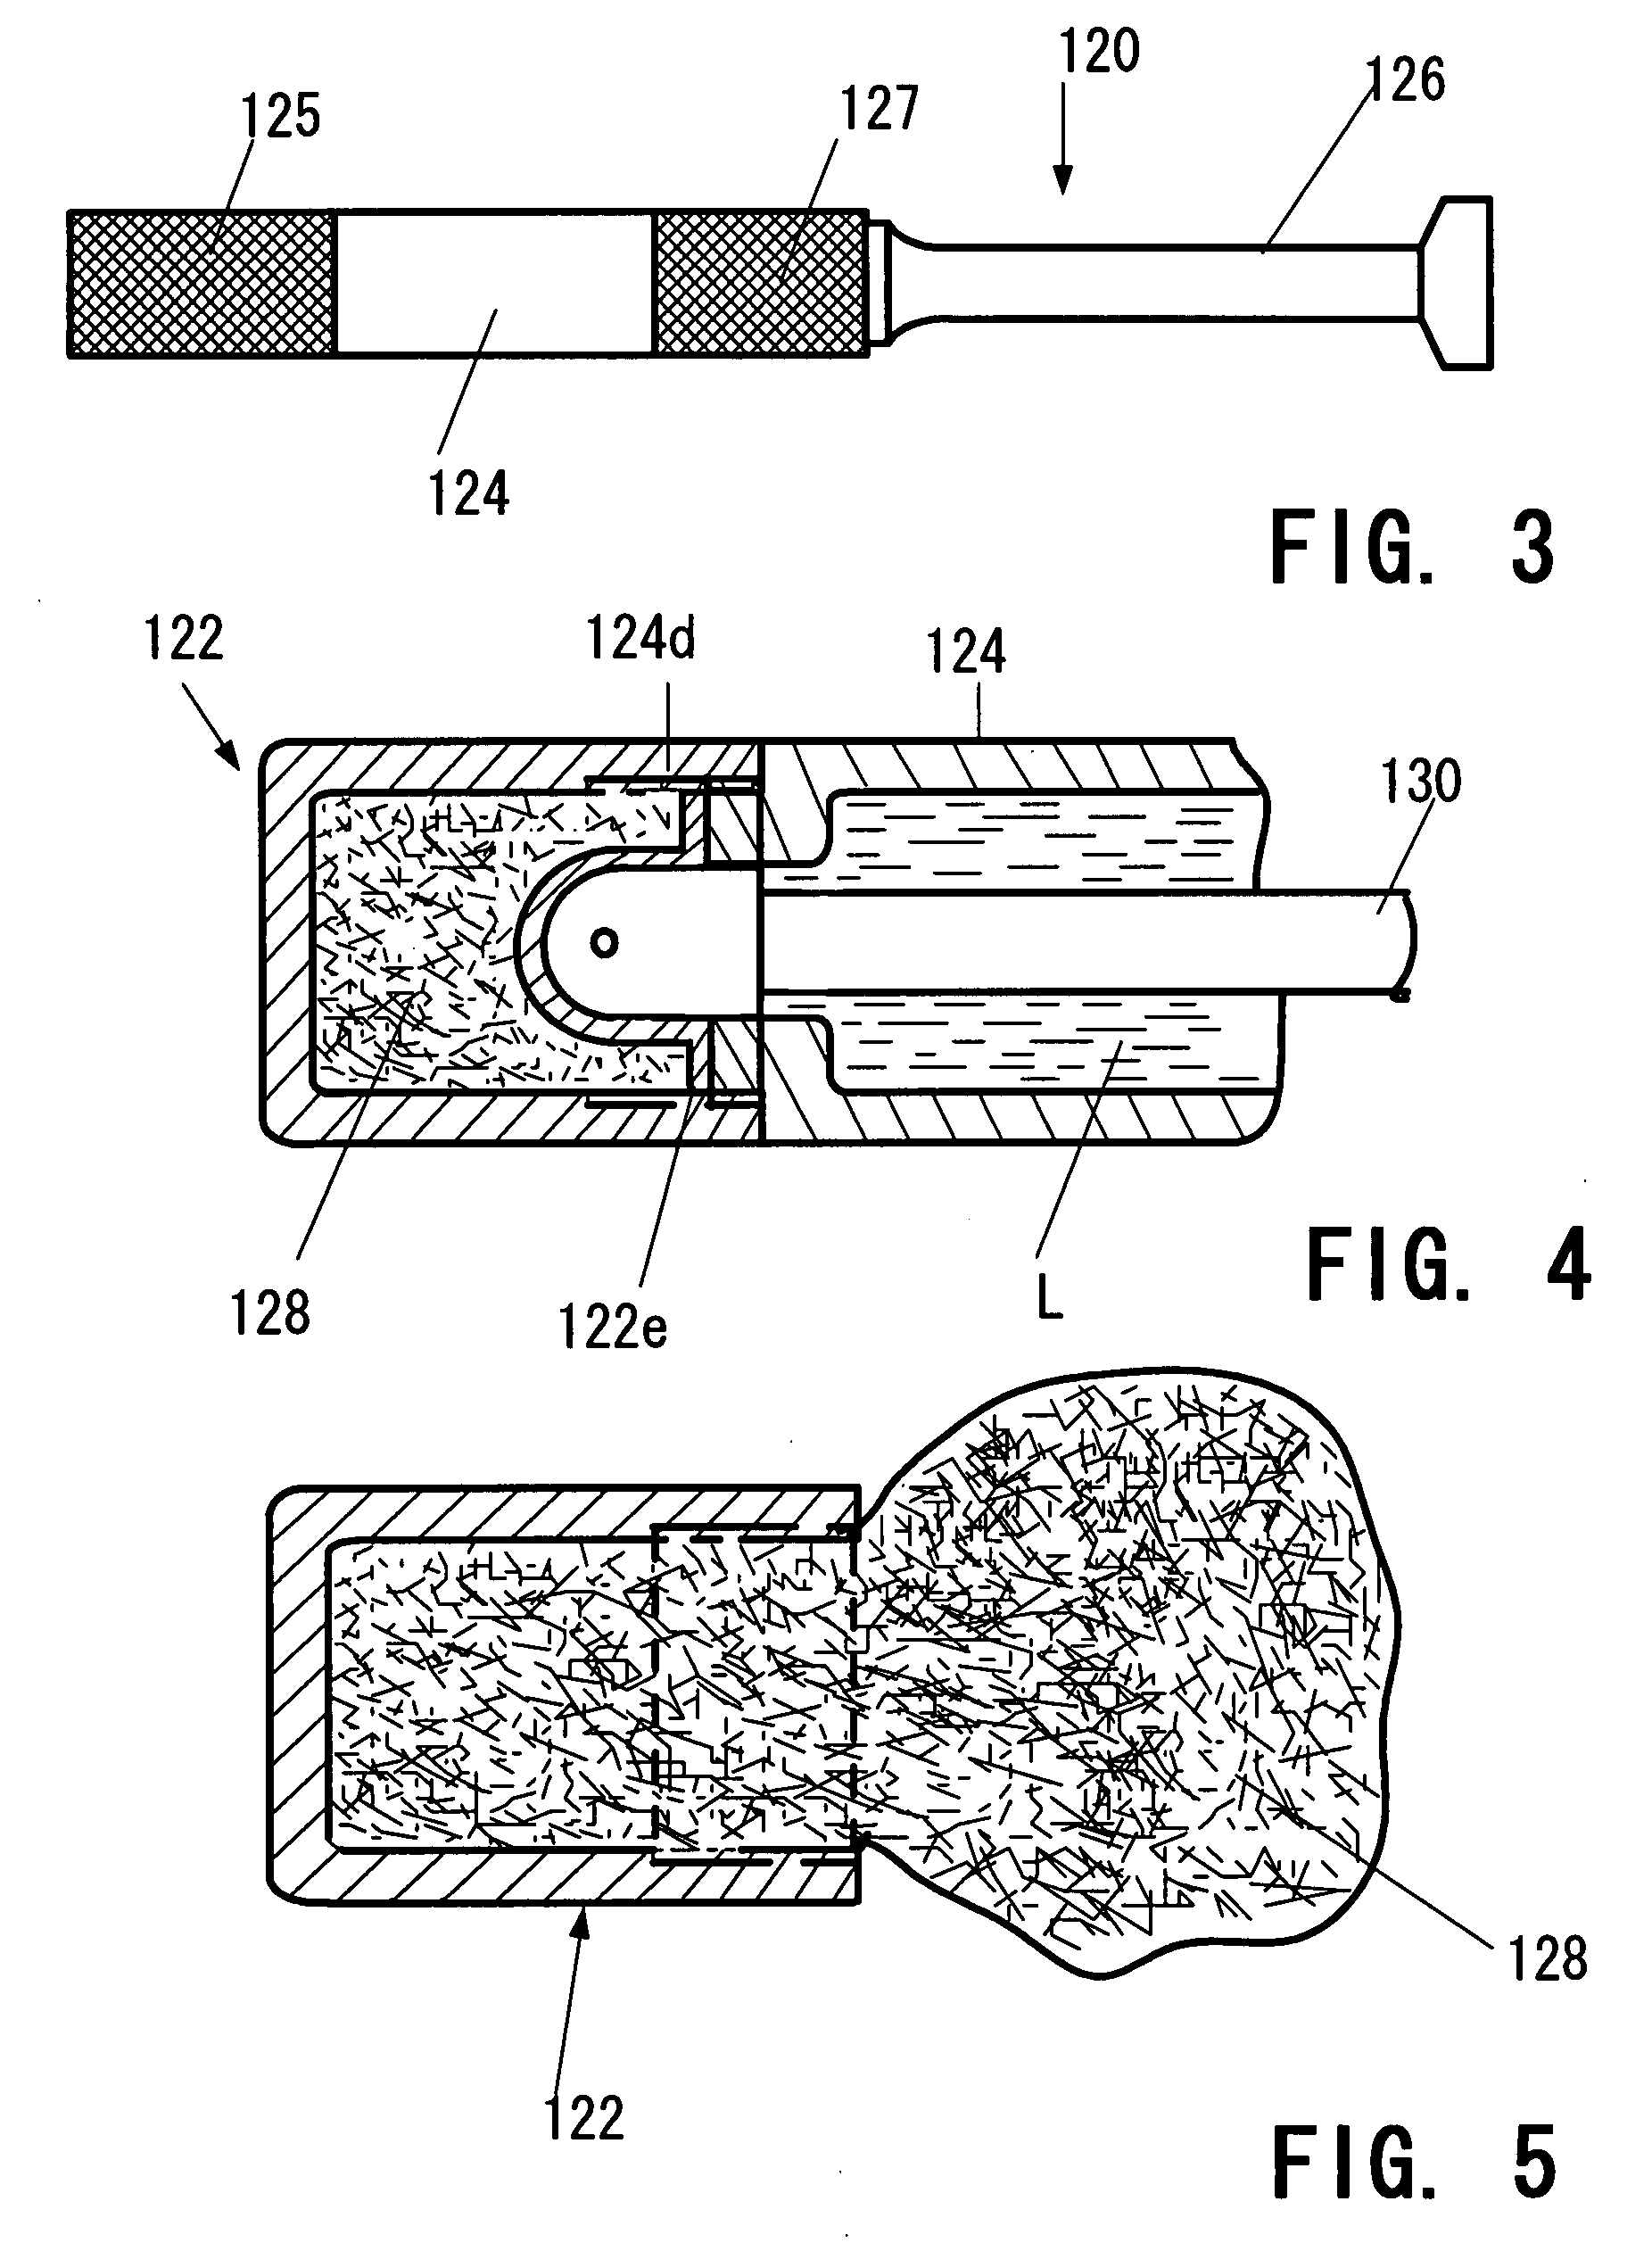 Urethral catheter assembly for combining catheterization with injection of therapeutic liquid into the urethral channel